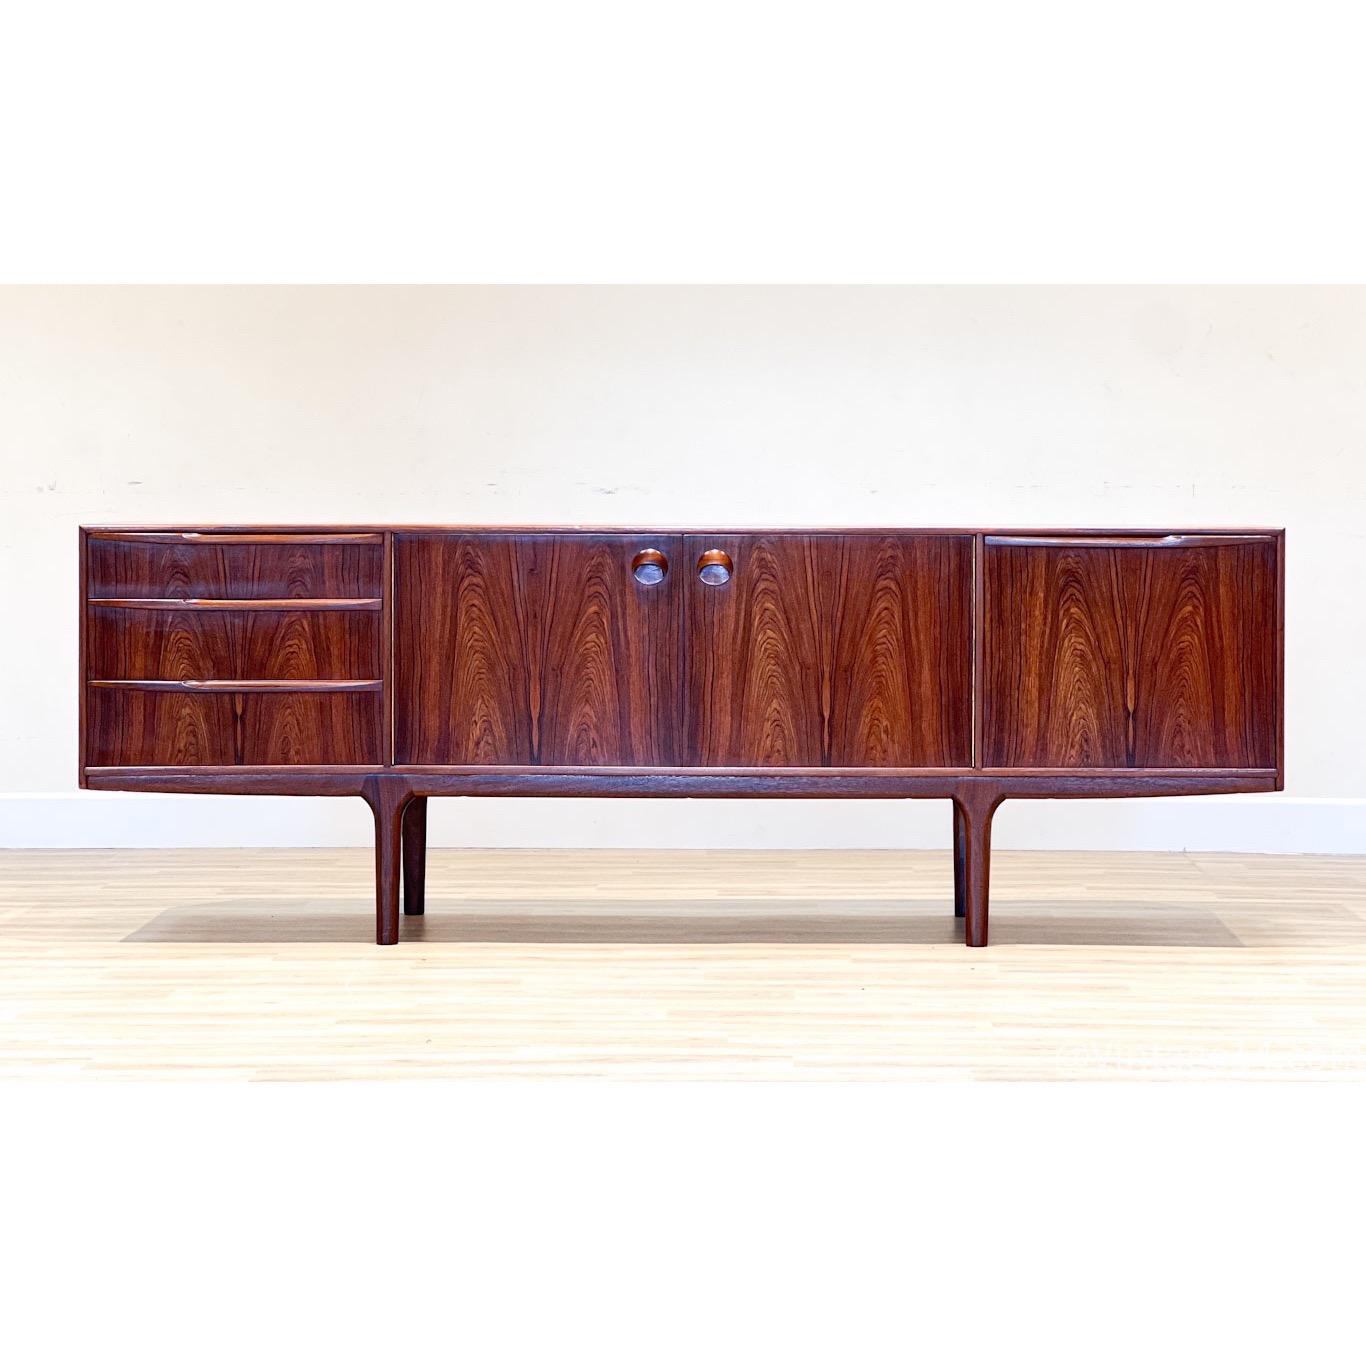 Tom Robertson designed this sideboard for its collection Dunfermline in Scotland for the high-end cabinet maker A.H. McIntosh. The sideboard, handcrafted in stunning rosewood, has all its original features.
This sideboard belongs to one of its